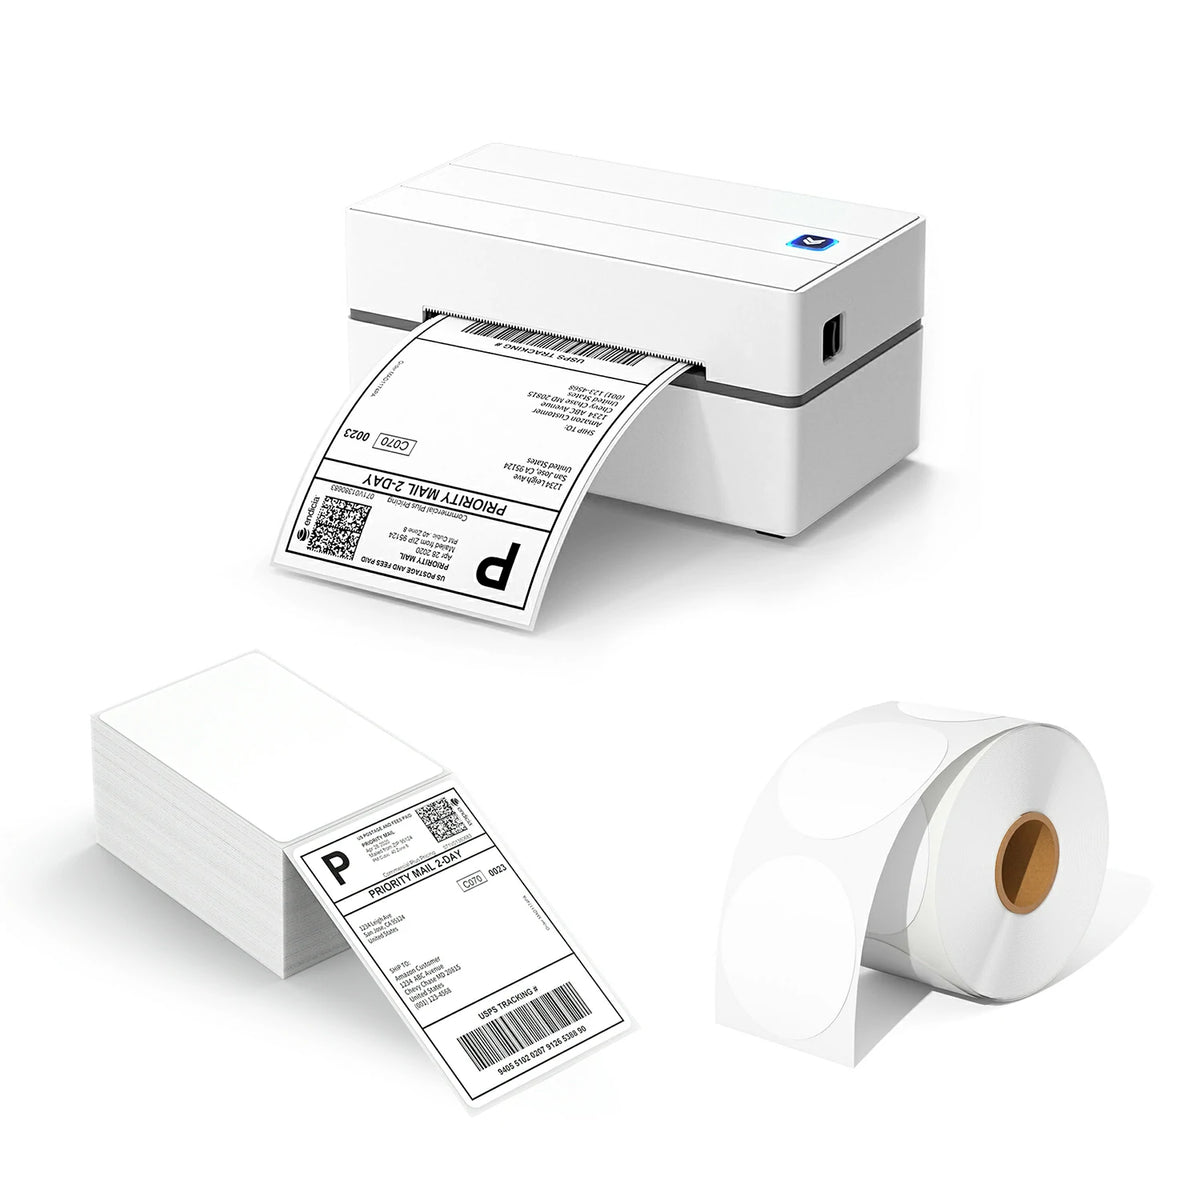 The MUNBYN 130 thermal printer kit includes a USB thermal label printer, a stack of shipping labels, and a roll of circle labels.